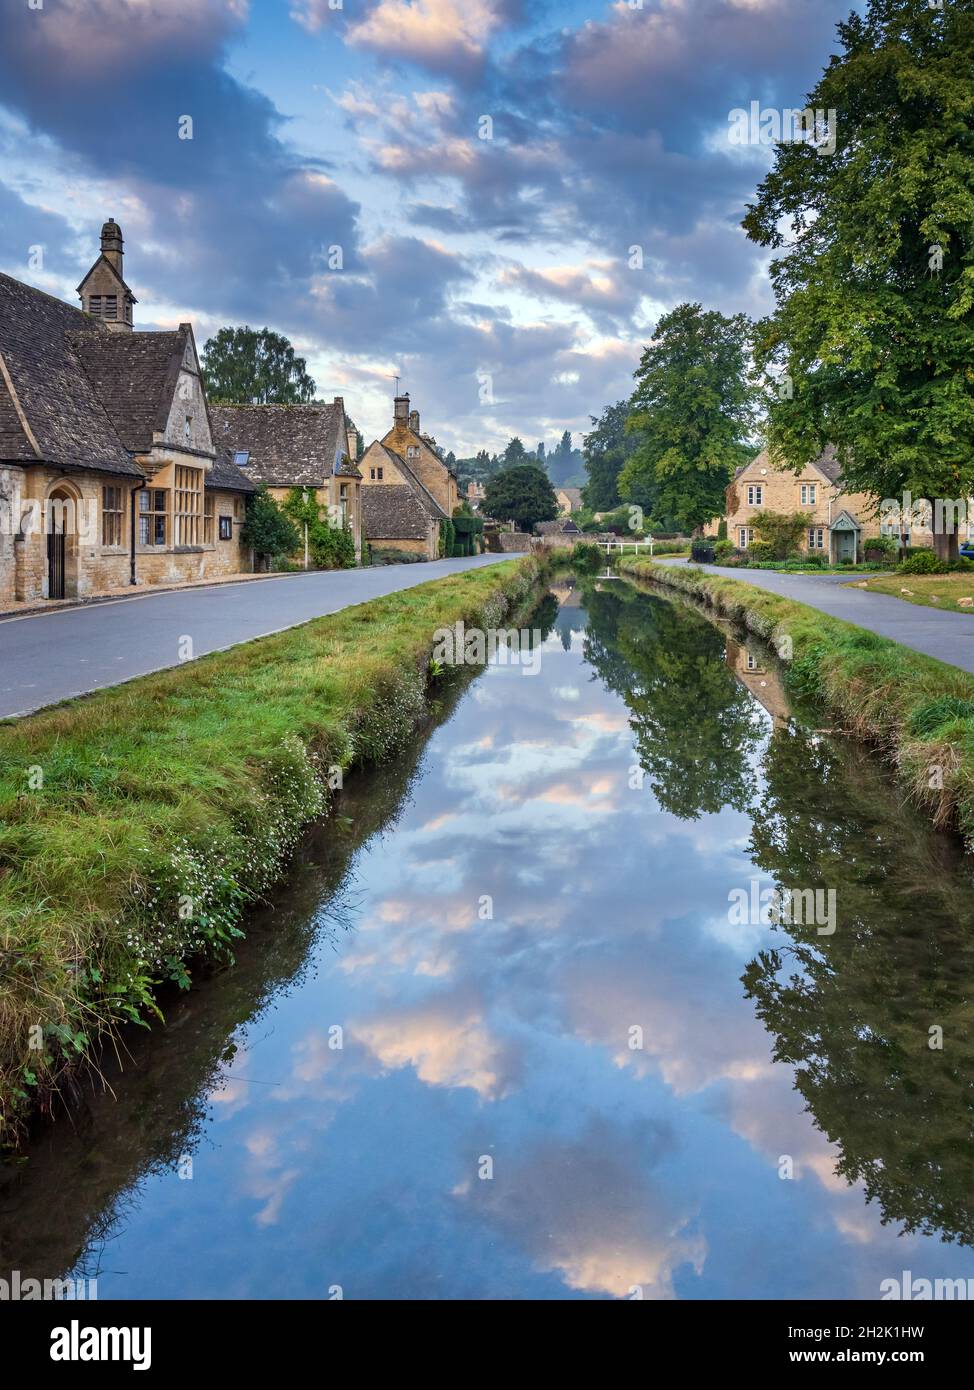 Limestone Cottages beside the River Eye in the picturesque Cotswold village of Lower Slaughter in Gloucestershire, England. Stock Photo